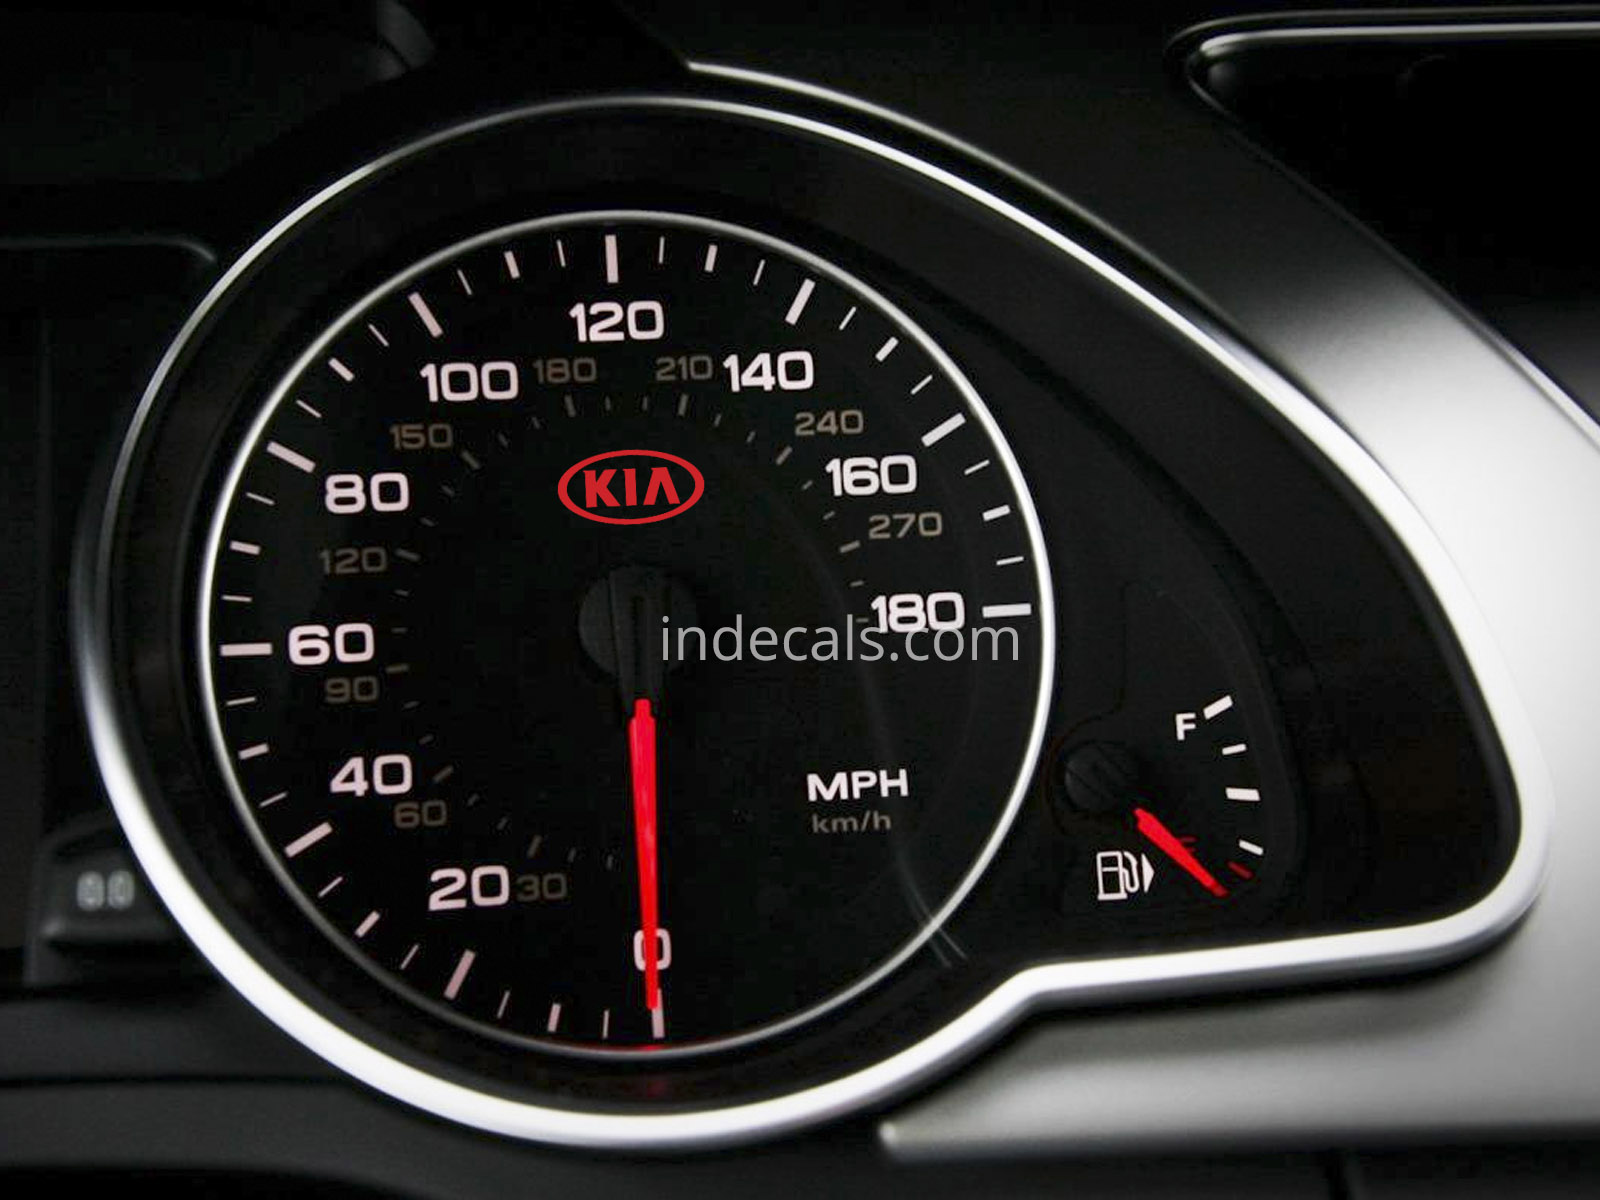 3 x KIA Stickers for Speedometer - Red